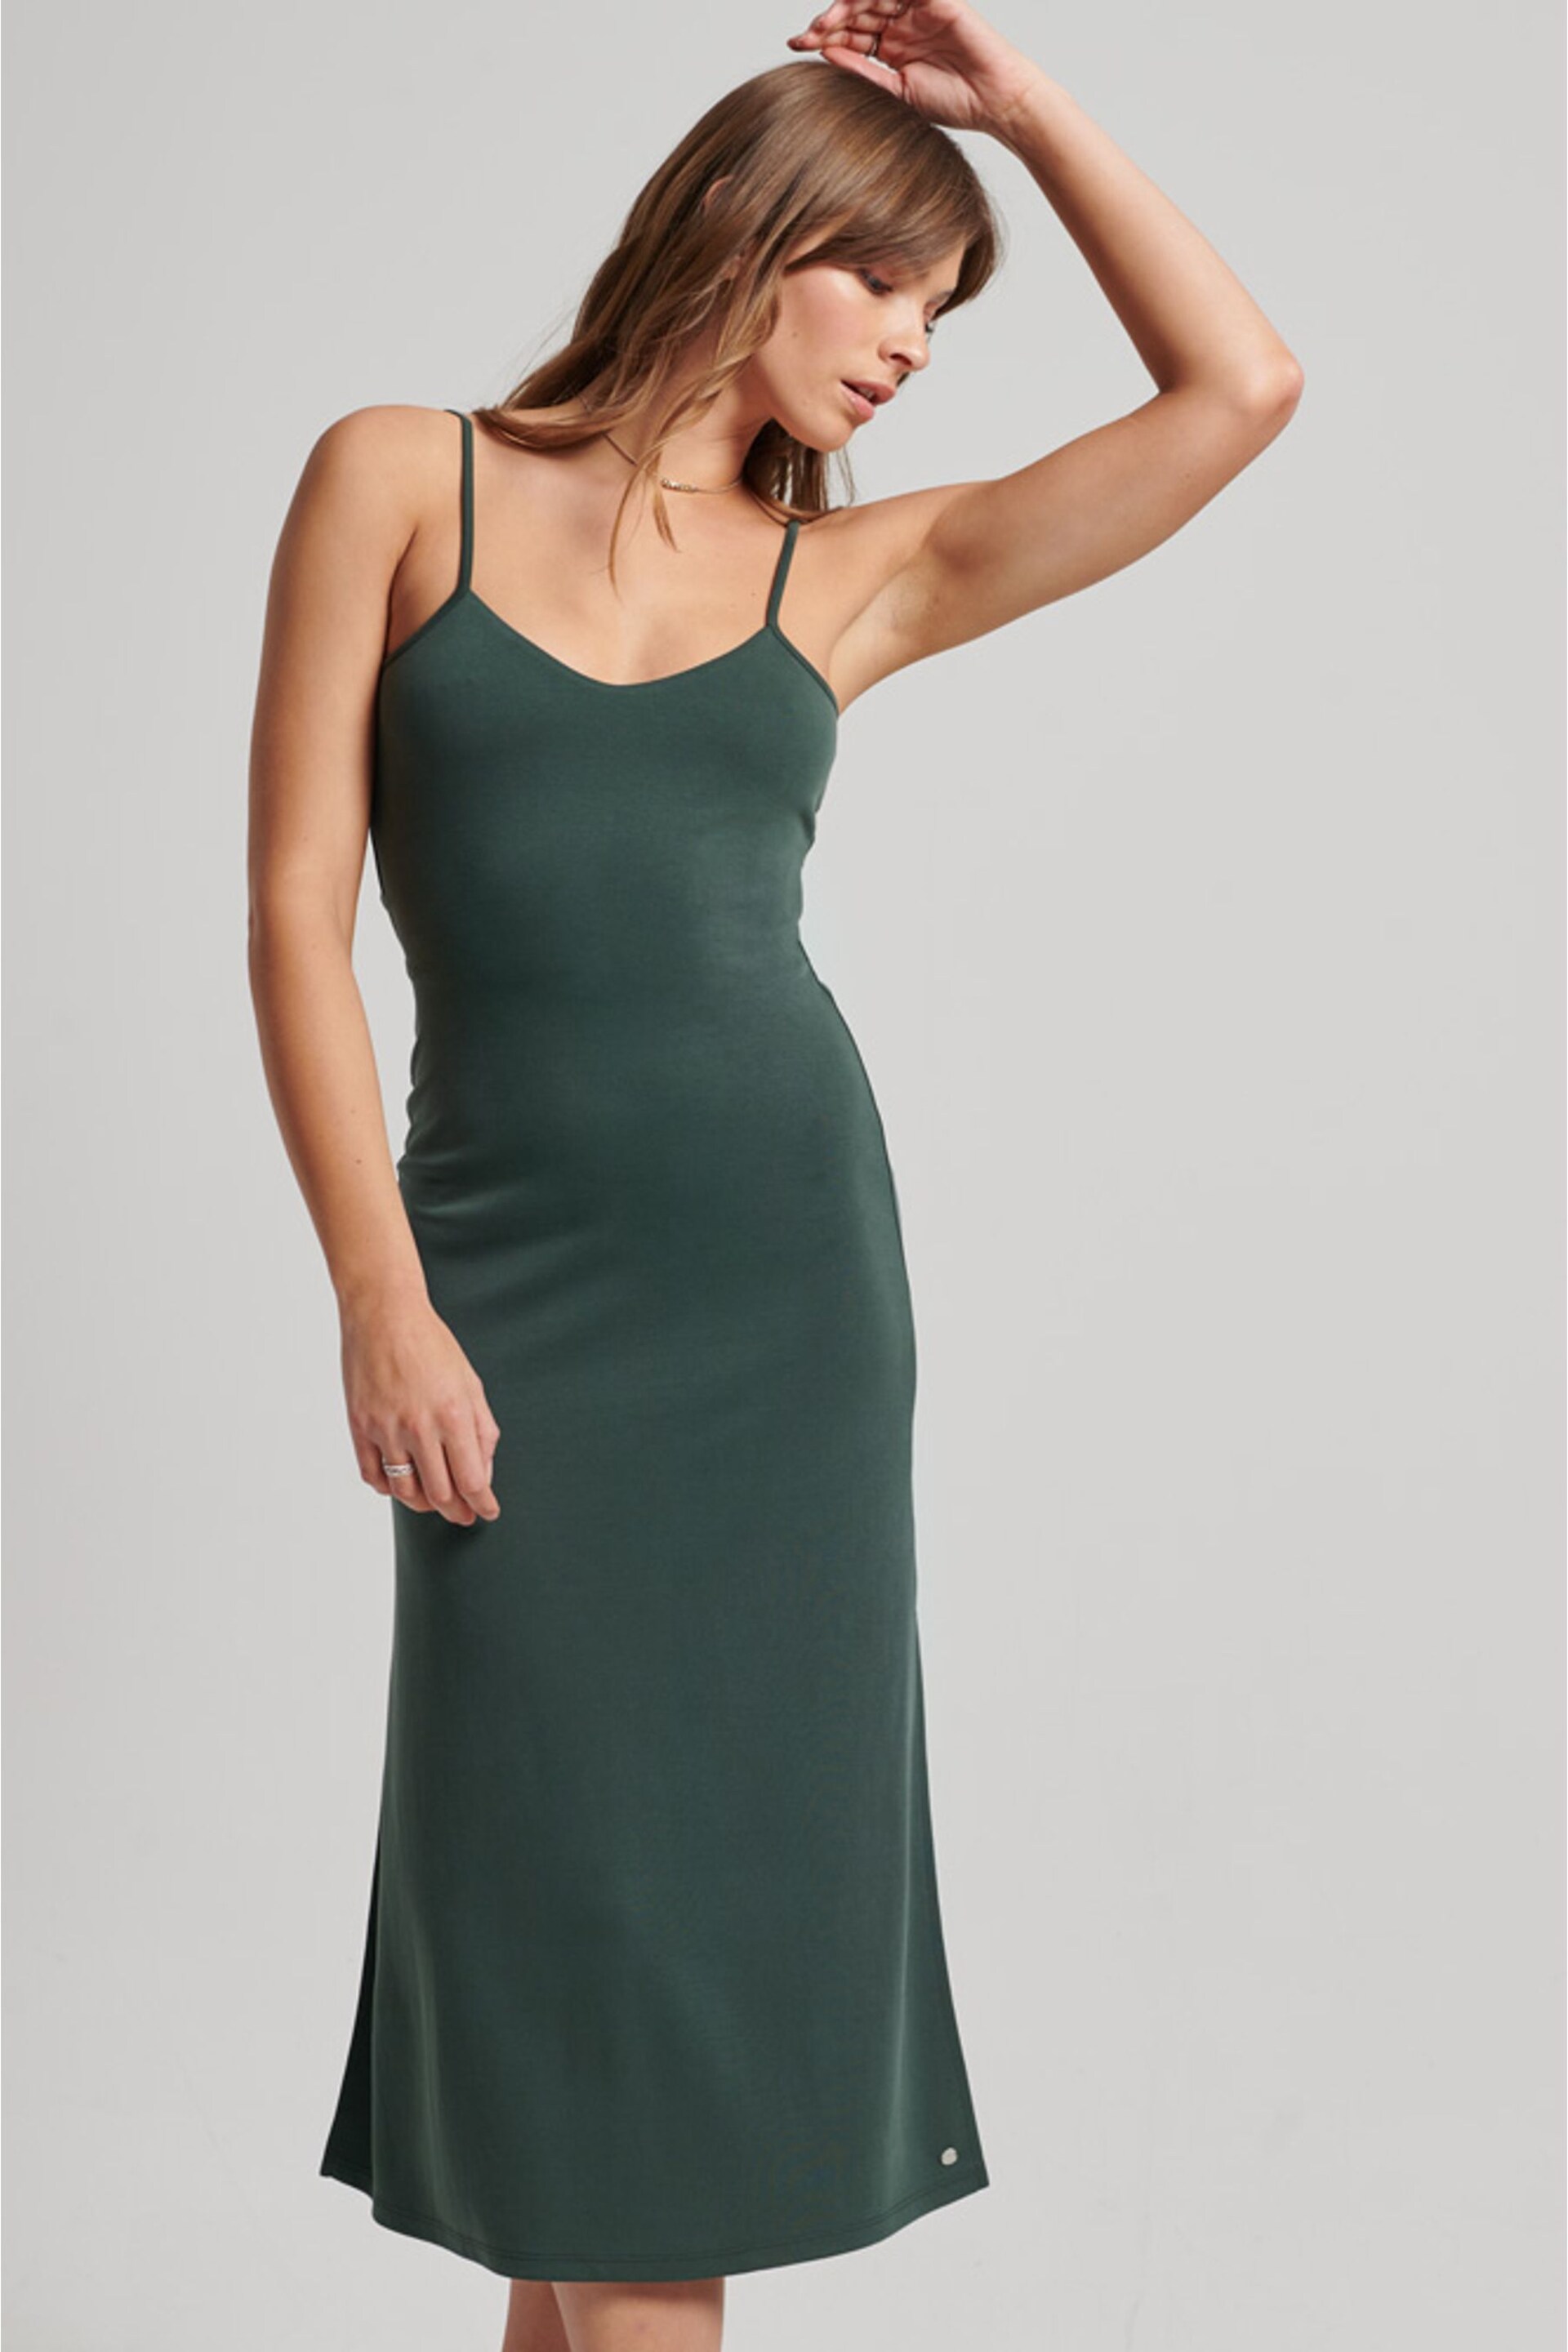 Superdry Green Jersey Open Back Dress - Image 4 of 6